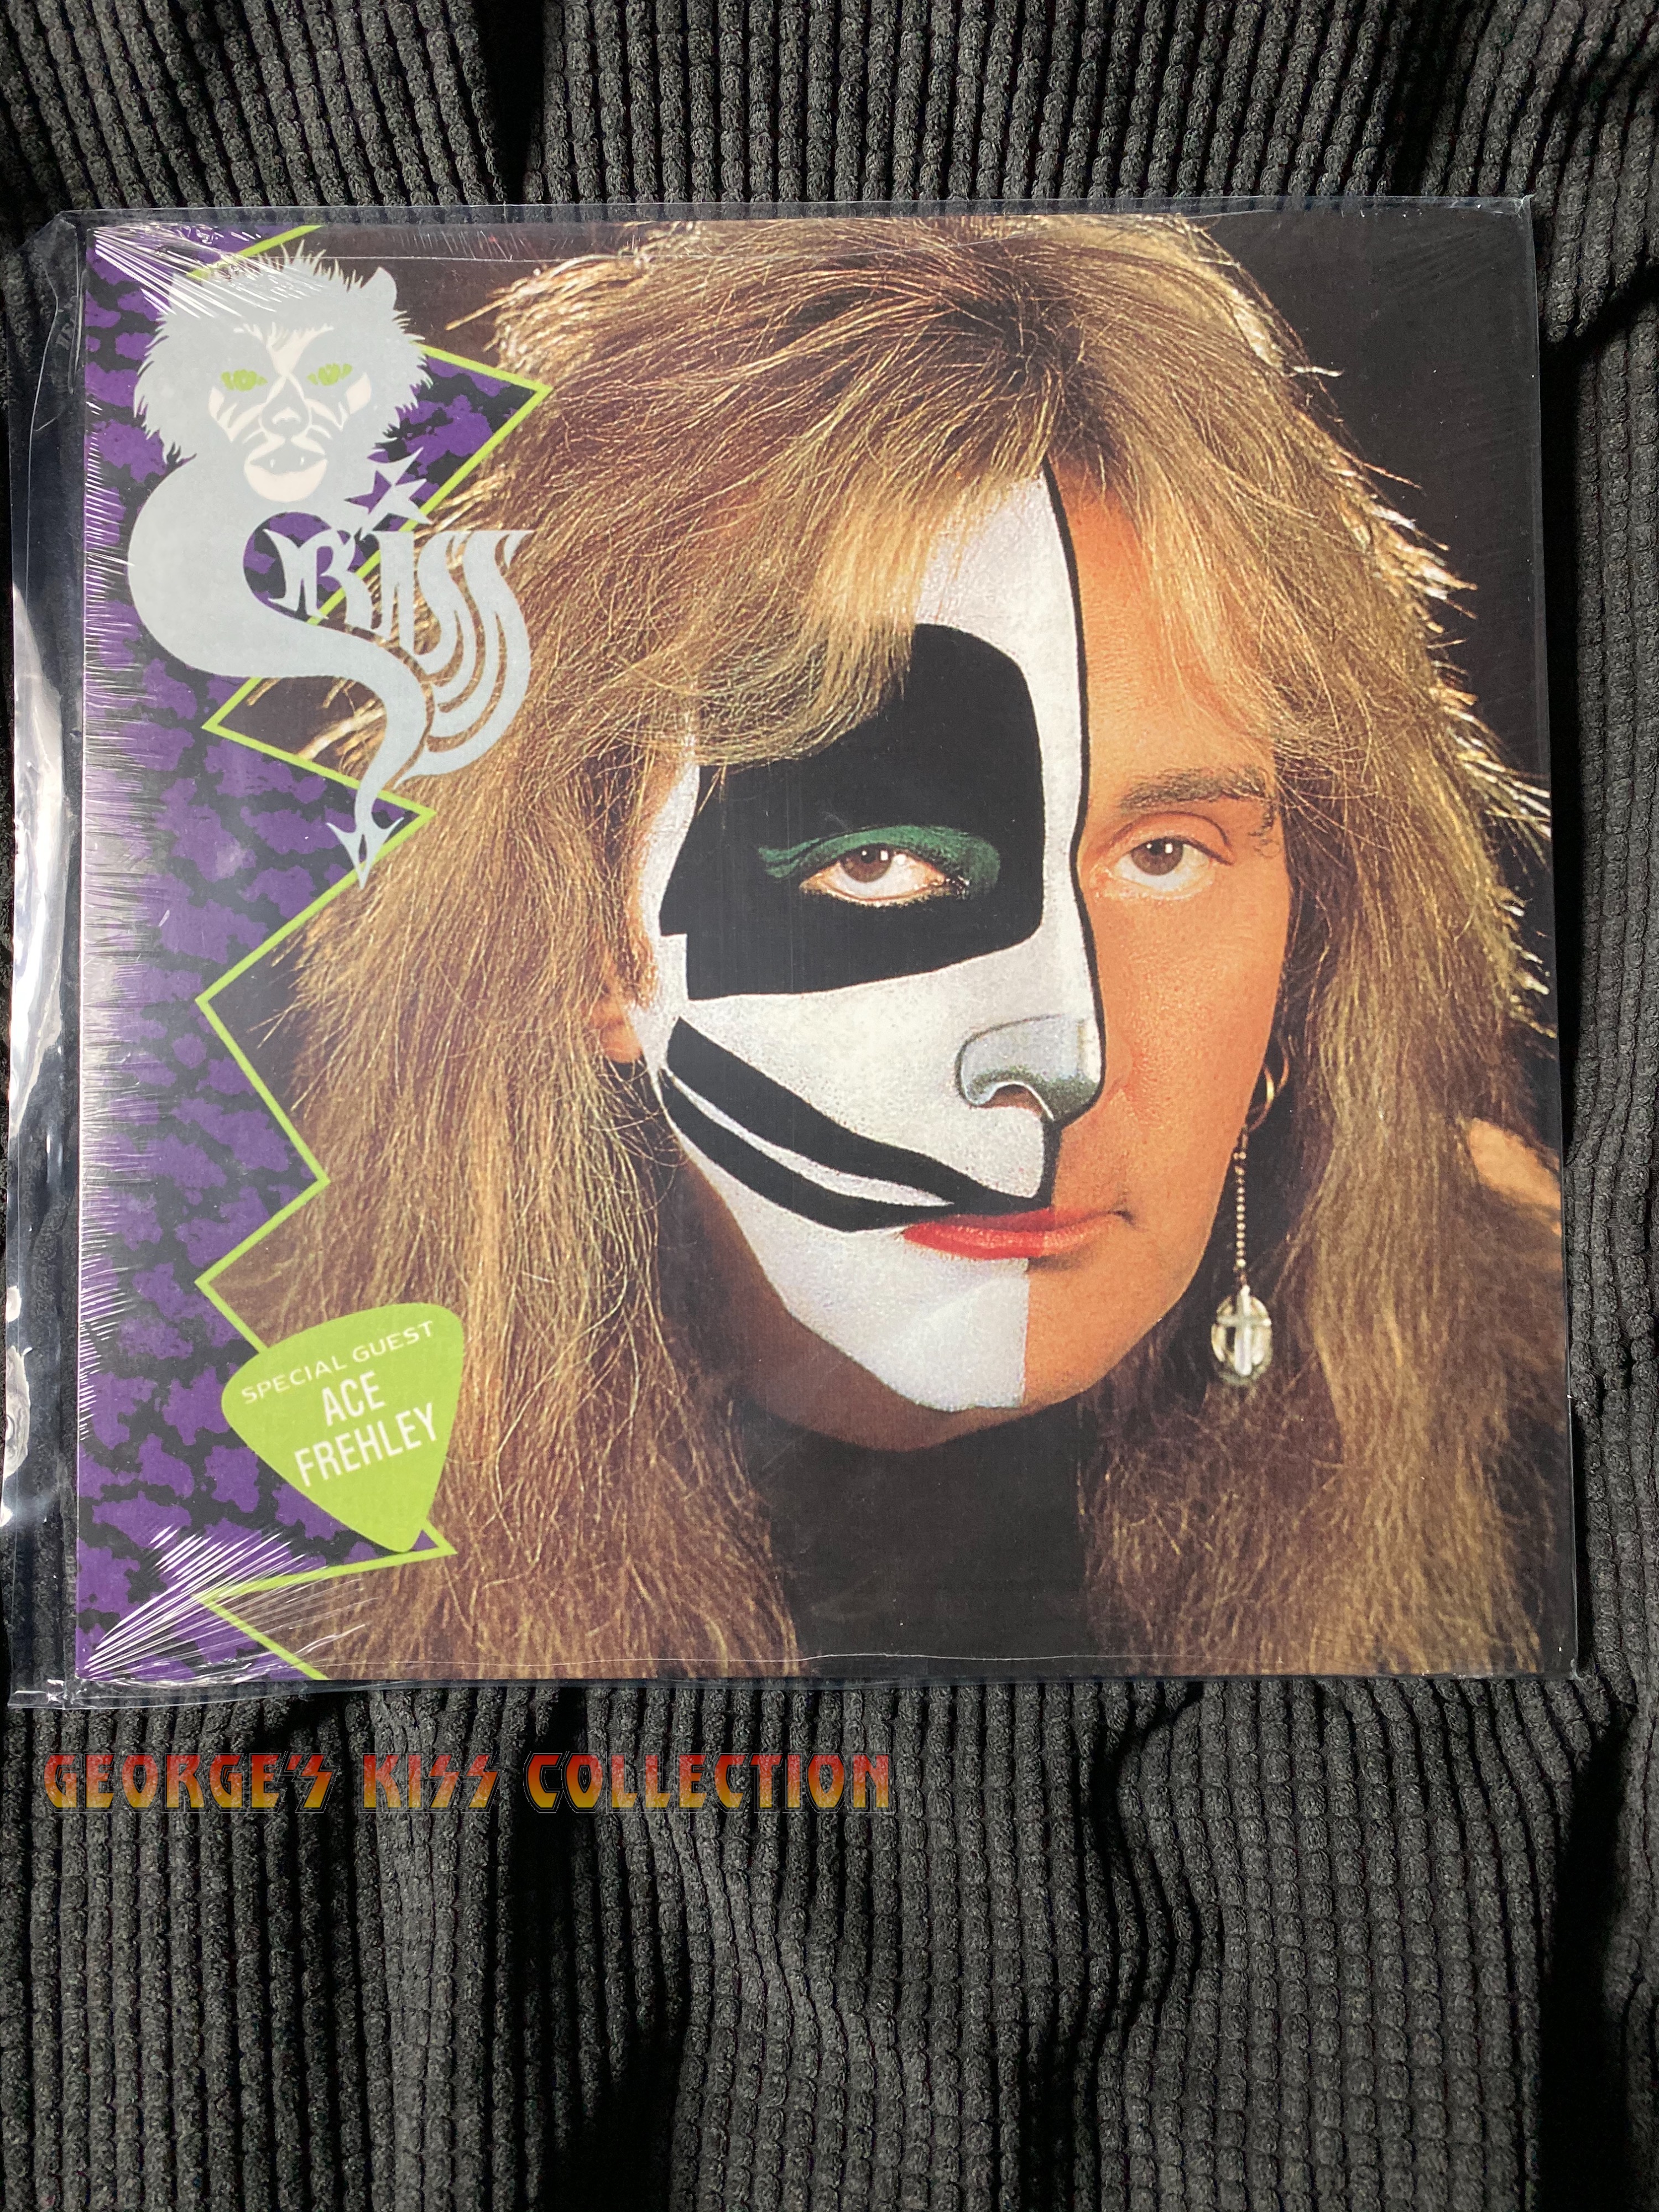 Peter Criss Collection - George's KISS Collection